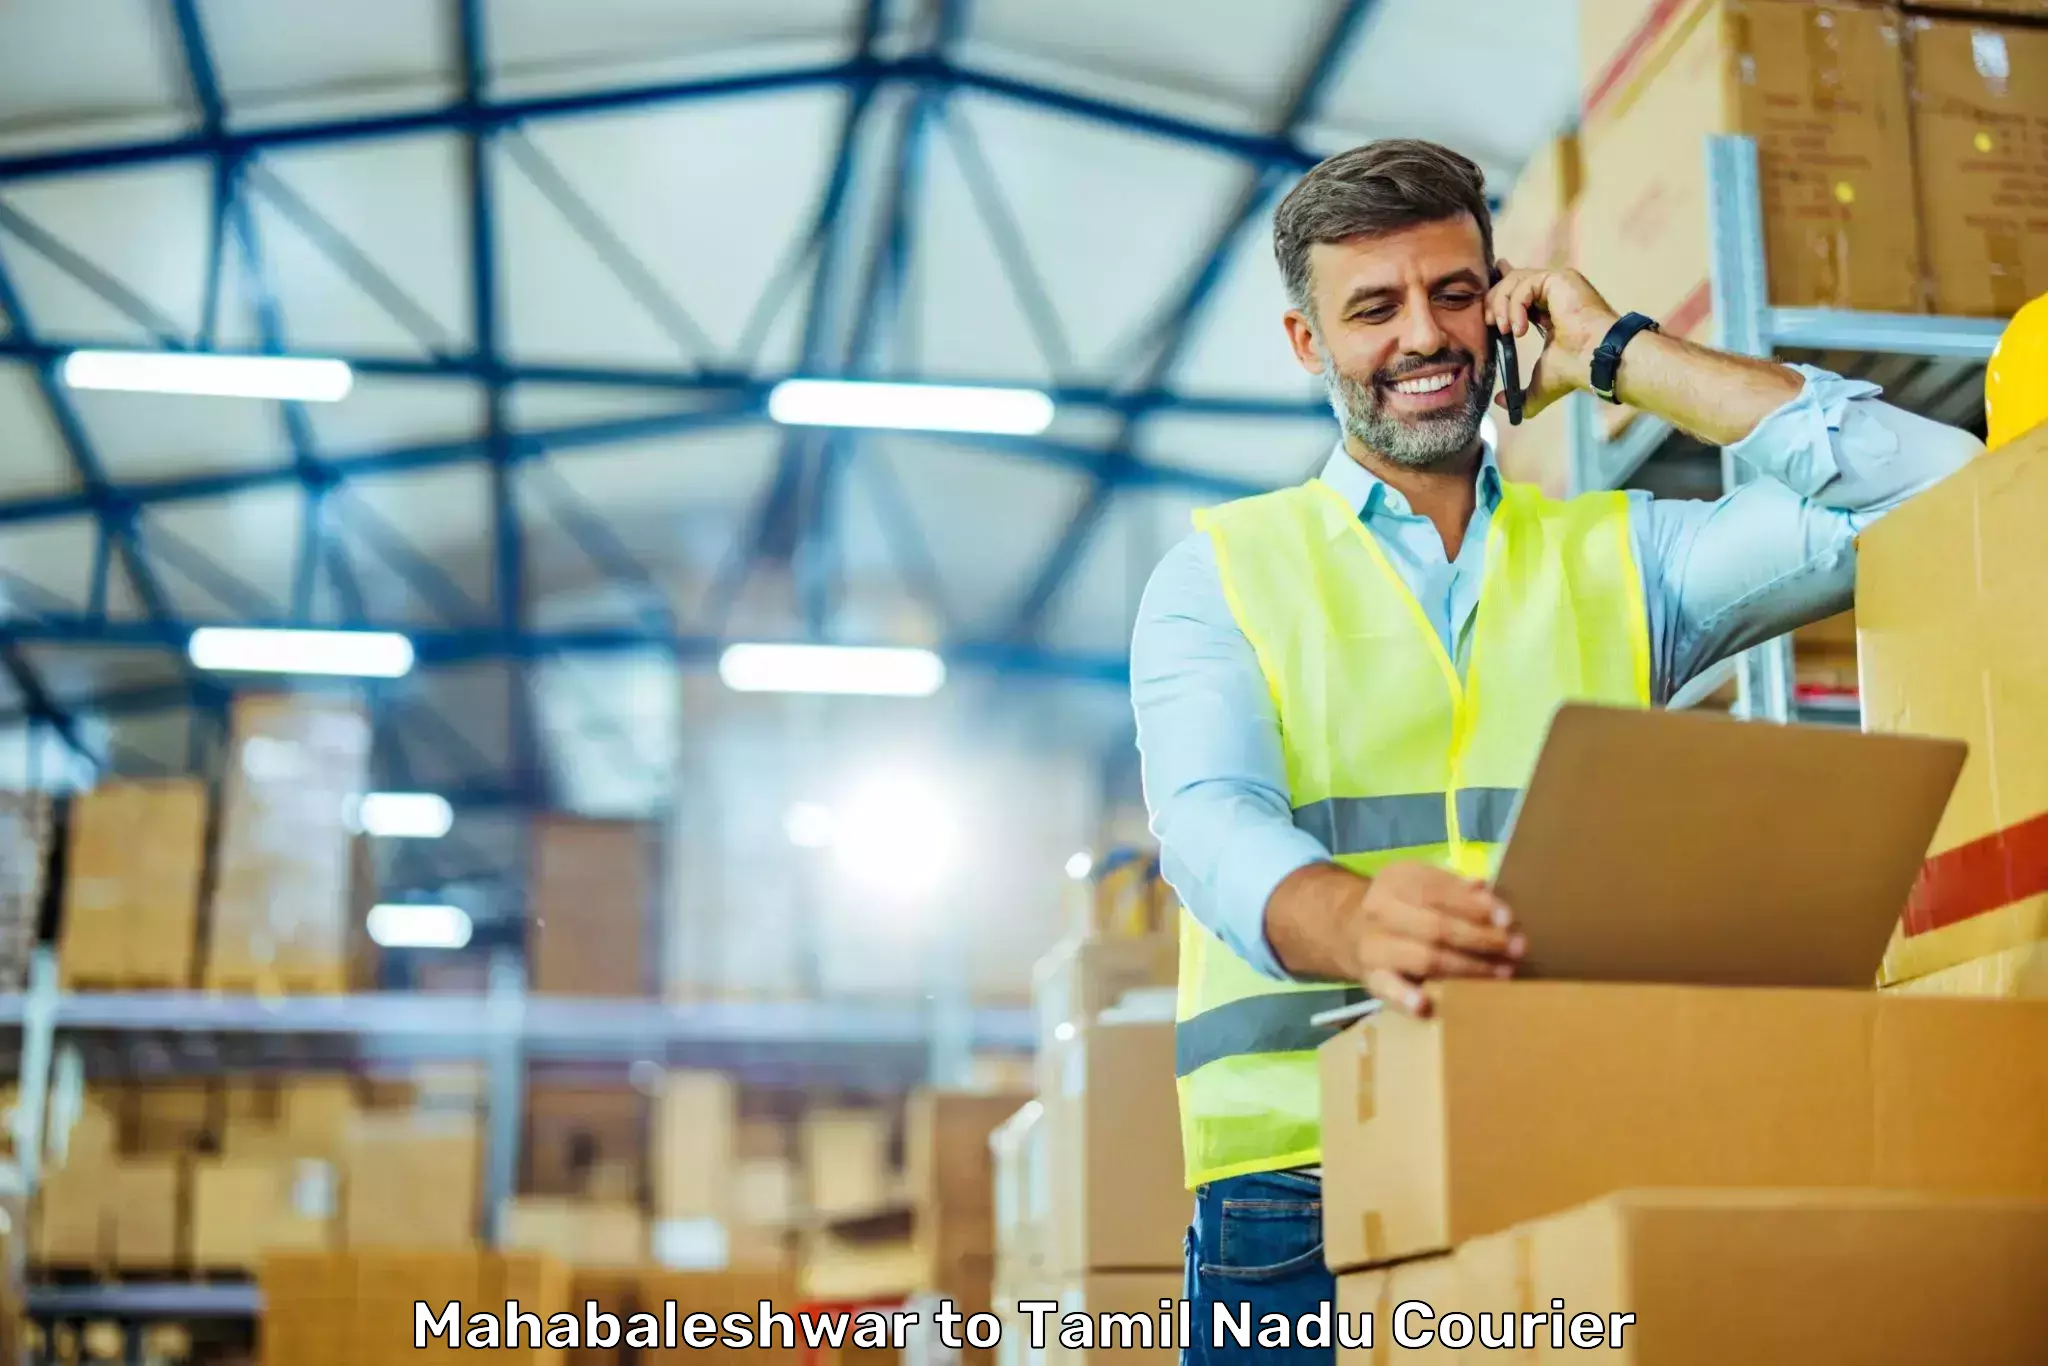 Easy access courier services Mahabaleshwar to Sattur